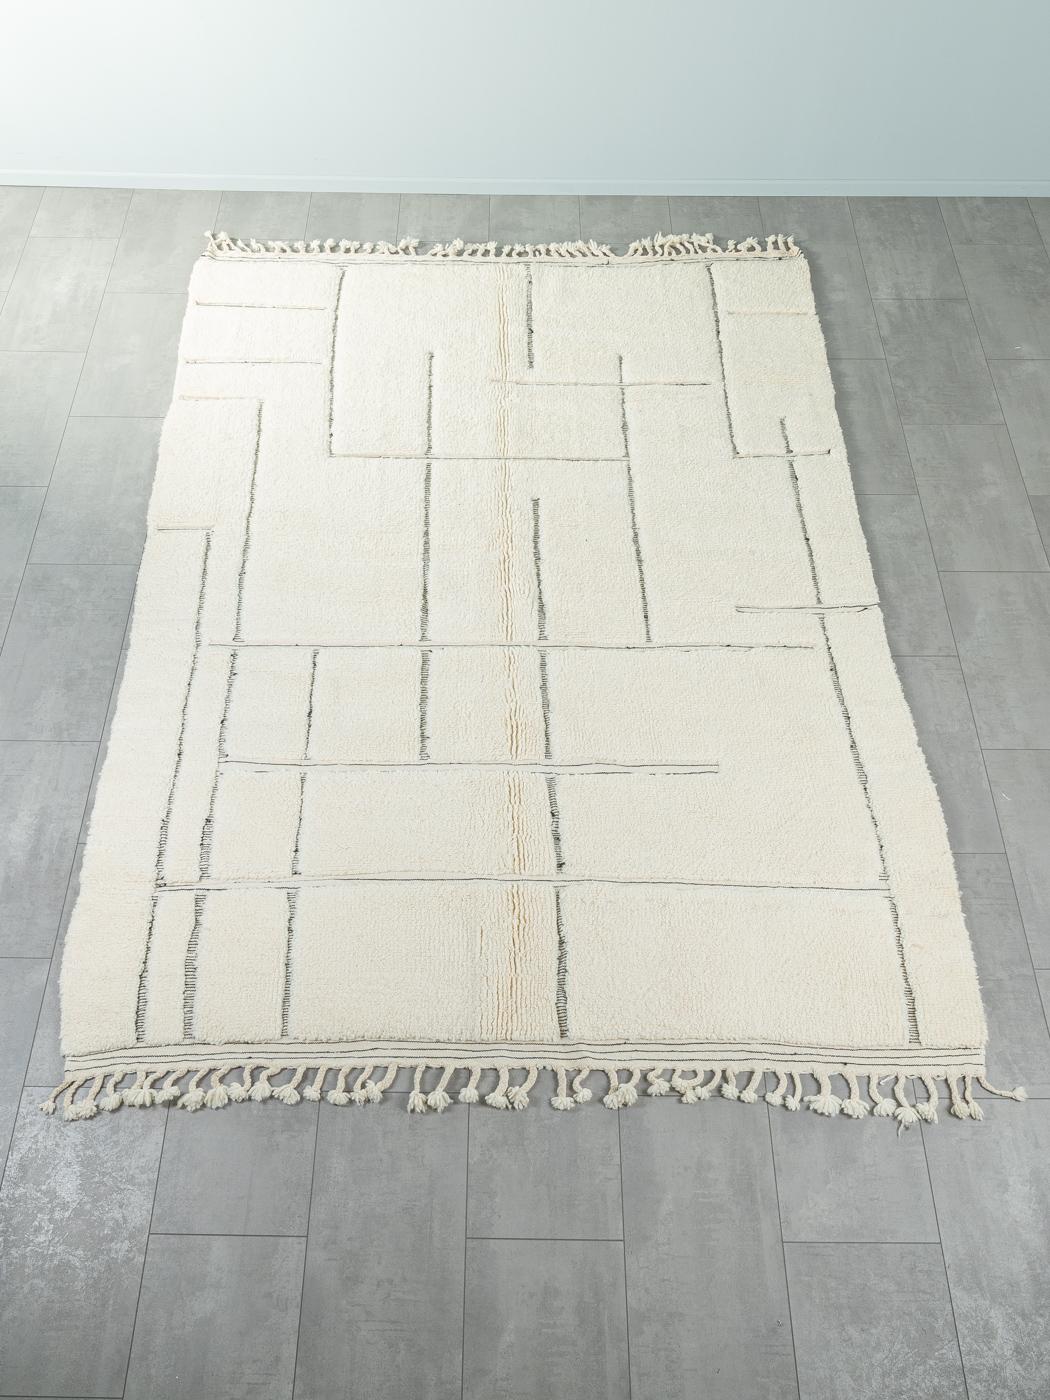 Airway is a contemporary 100% wool rug – thick and soft, comfortable underfoot. Our Berber rugs are handwoven and handknotted by Amazigh women in the Atlas Mountains. These communities have been crafting rugs for thousands of years. One knot at a